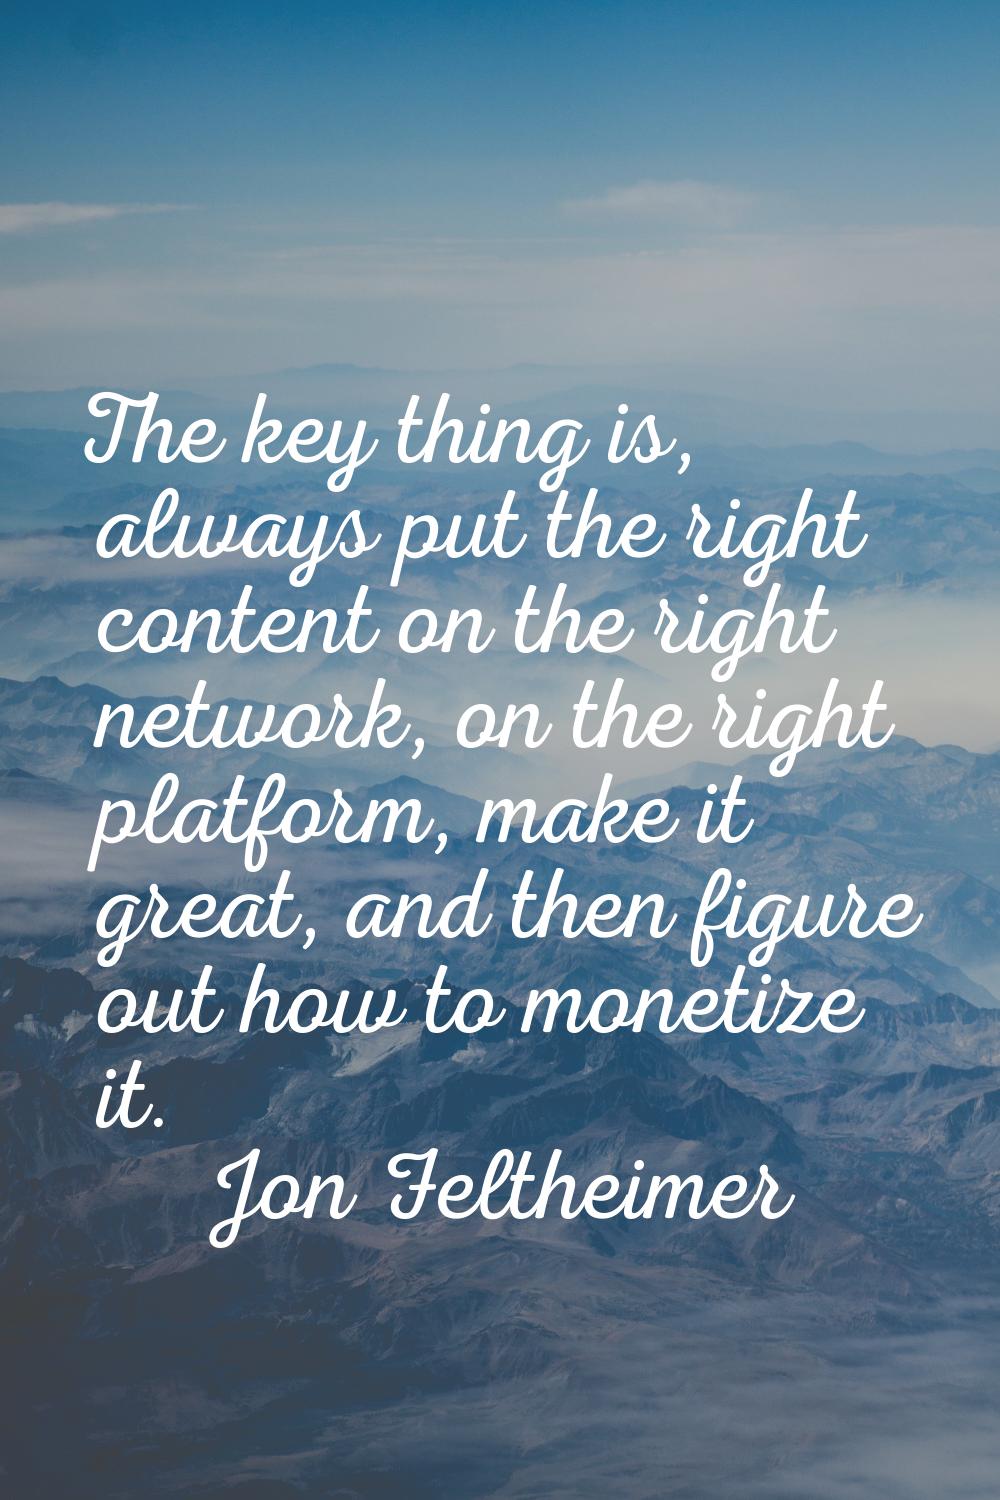 The key thing is, always put the right content on the right network, on the right platform, make it